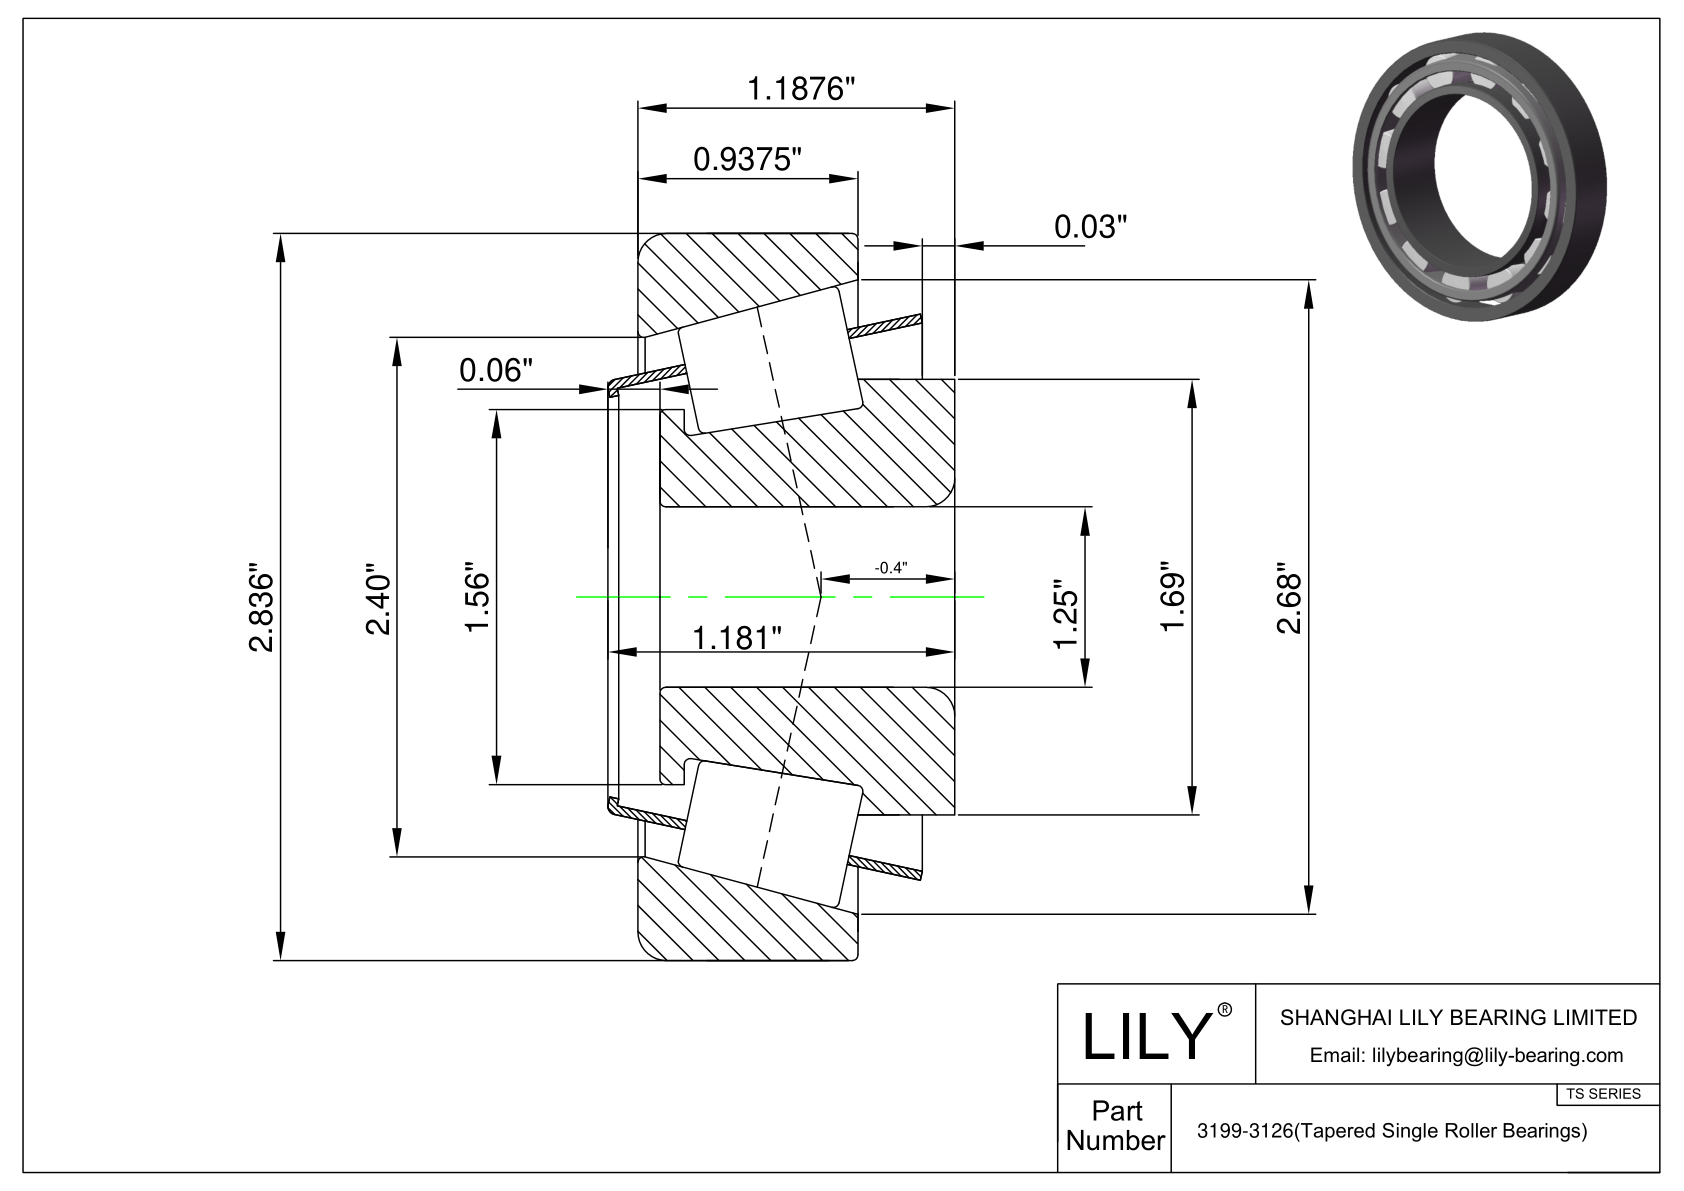 3199-3126 TS (Tapered Single Roller Bearings) (Imperial) cad drawing